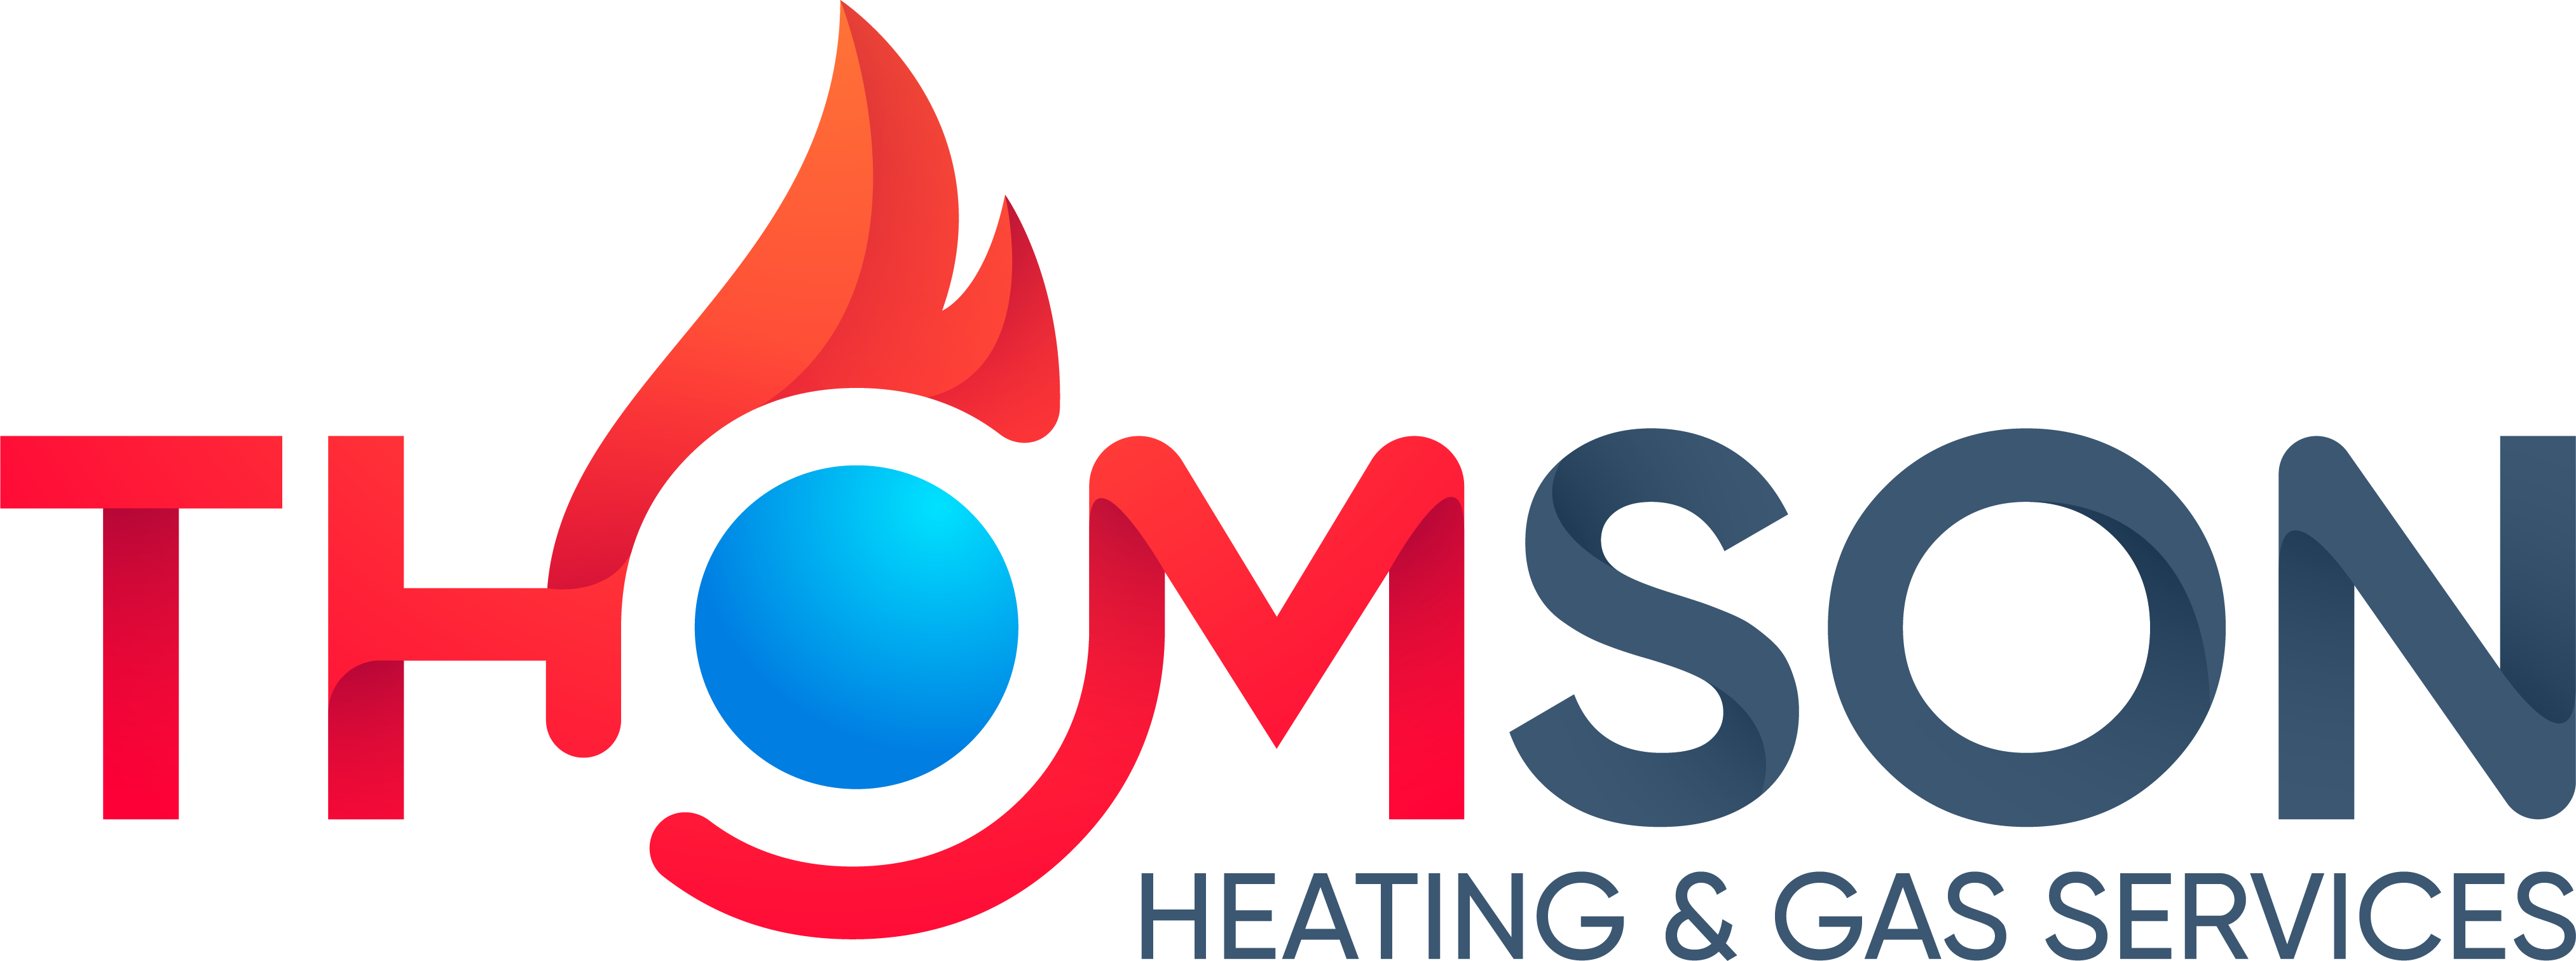 Thomson Heating and Gas Services Dumfries